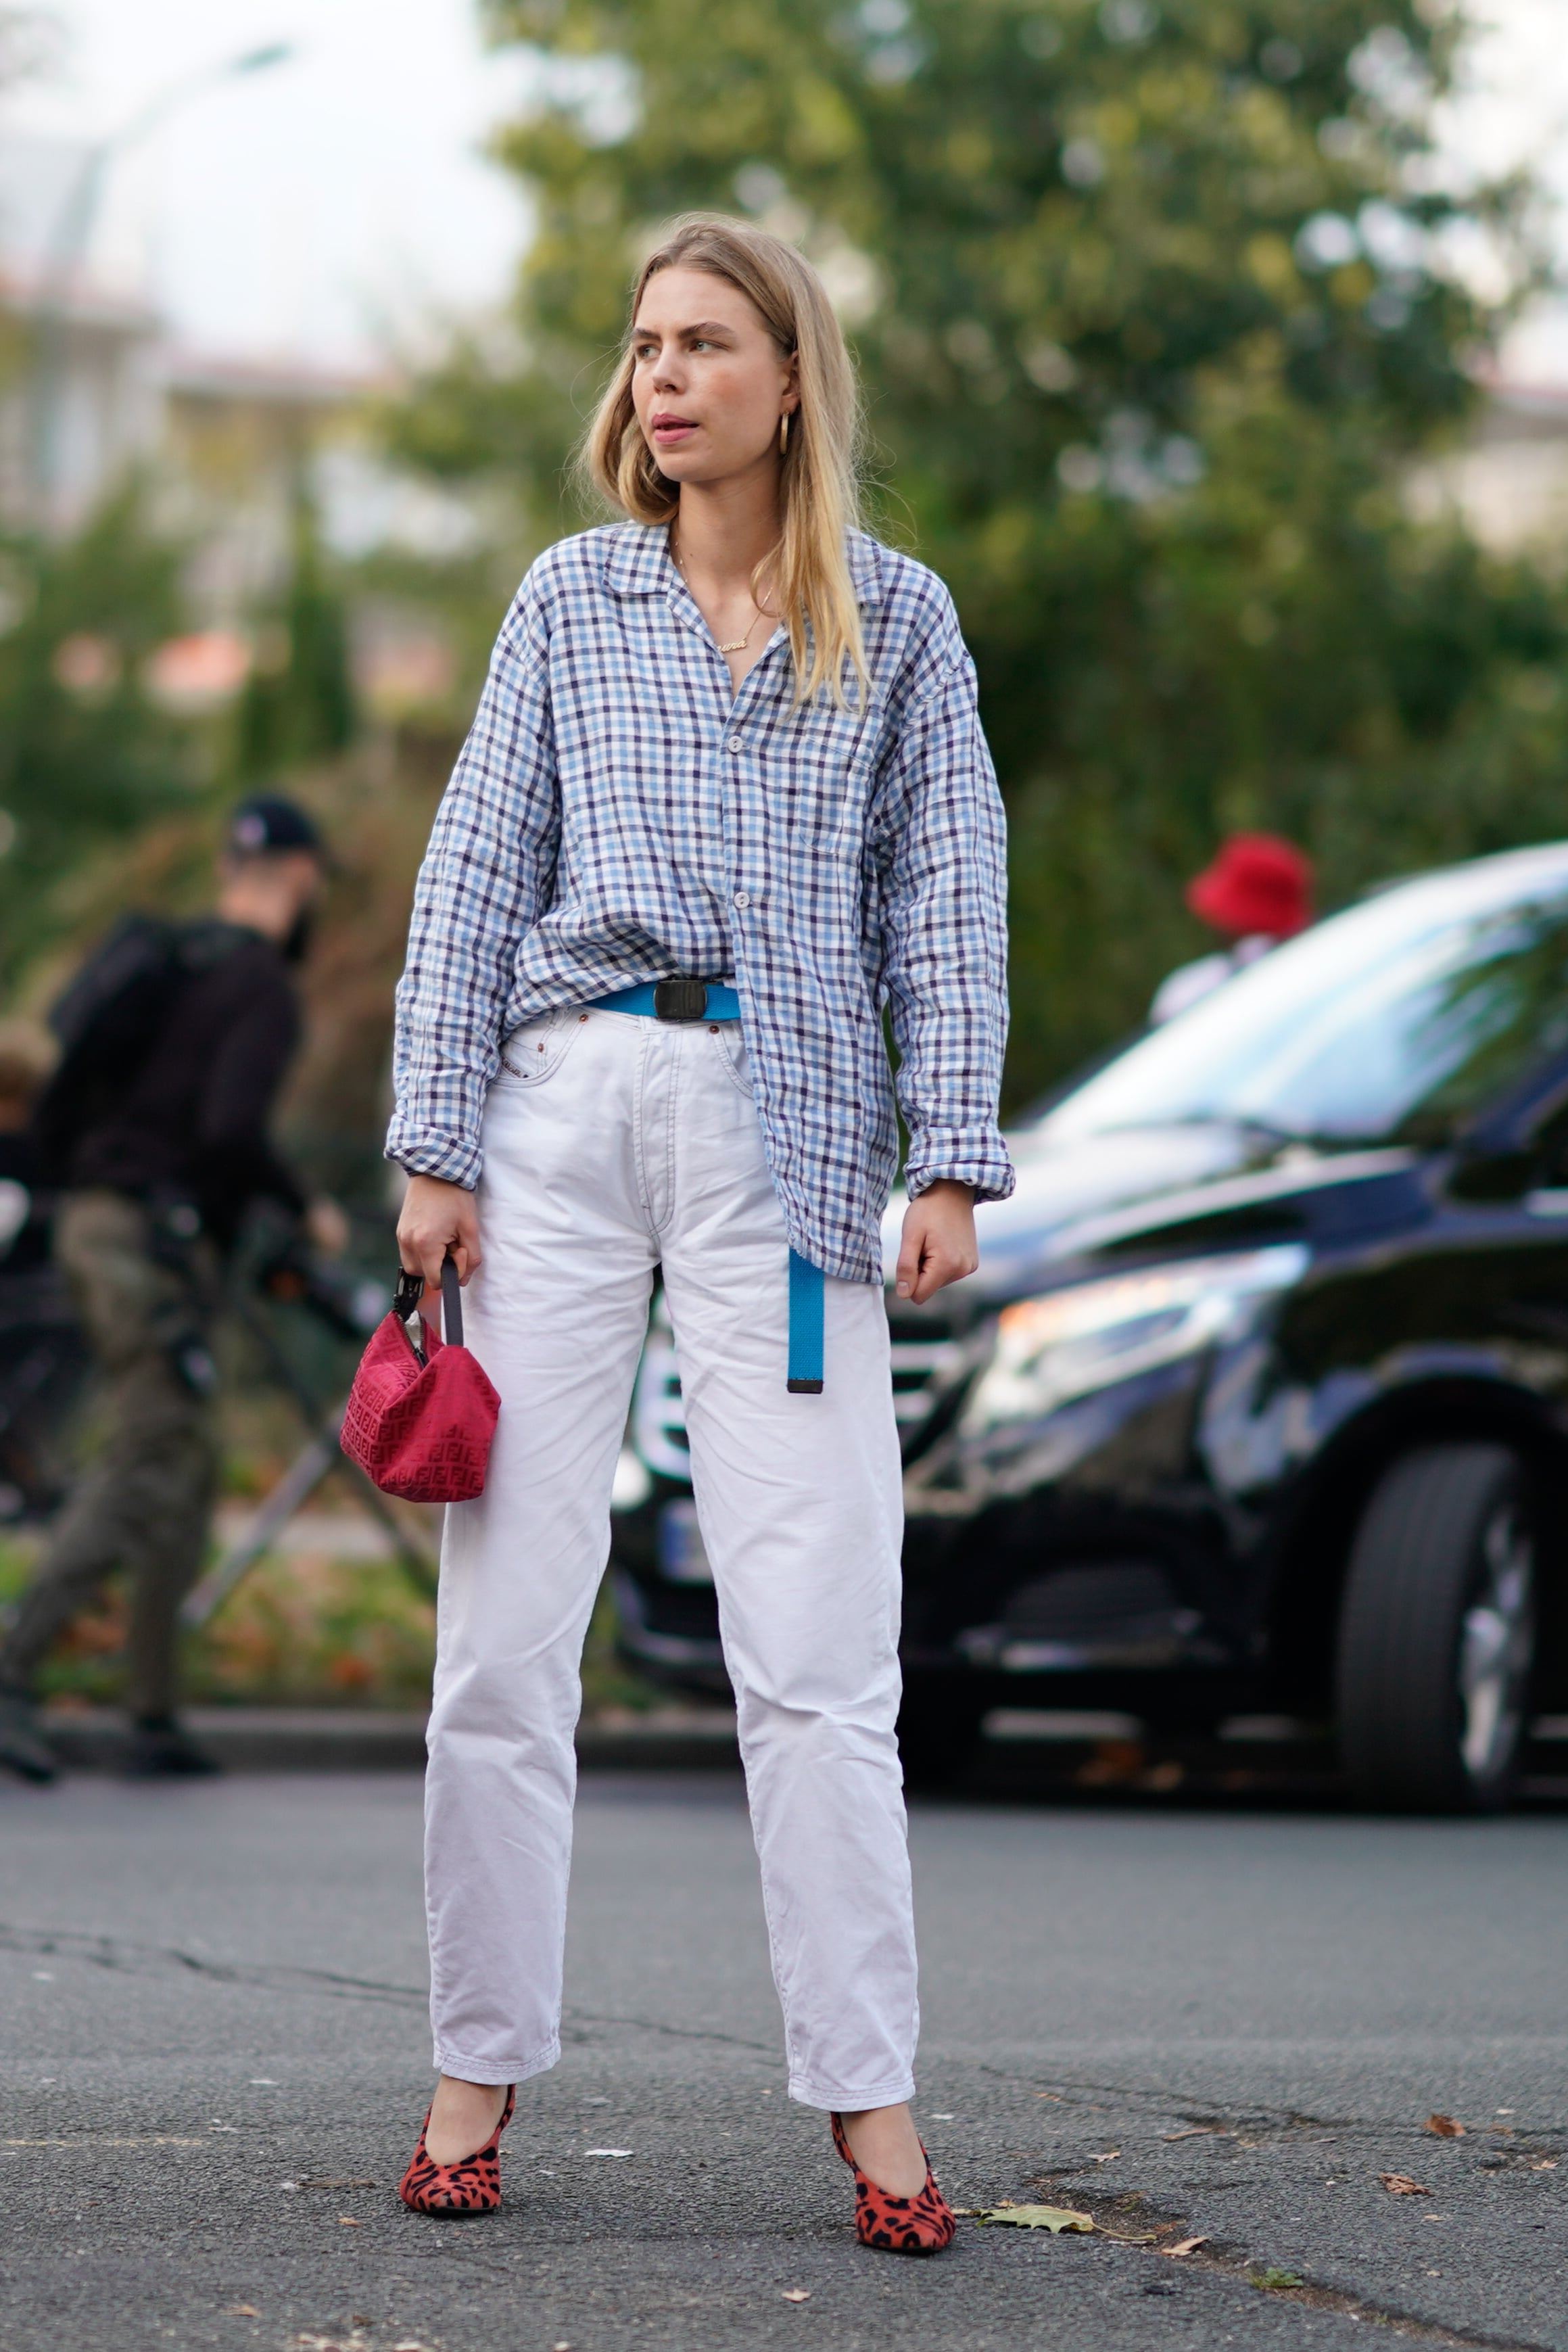 How to Wear a Half-Tucked Shirt